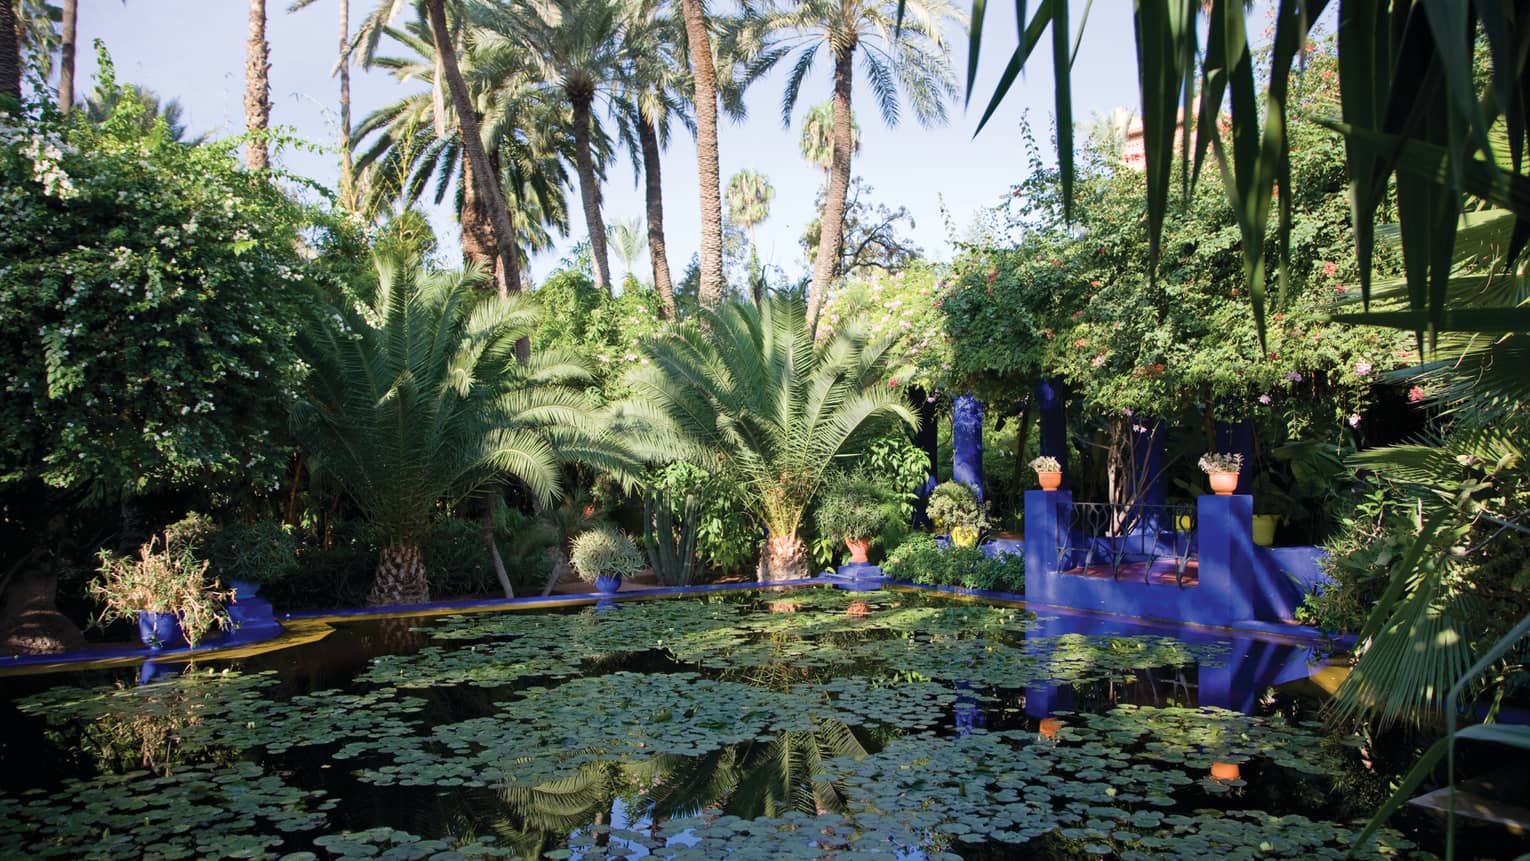 Bright blue railings around Majorelle Garden pond with lily pads, towering palm trees